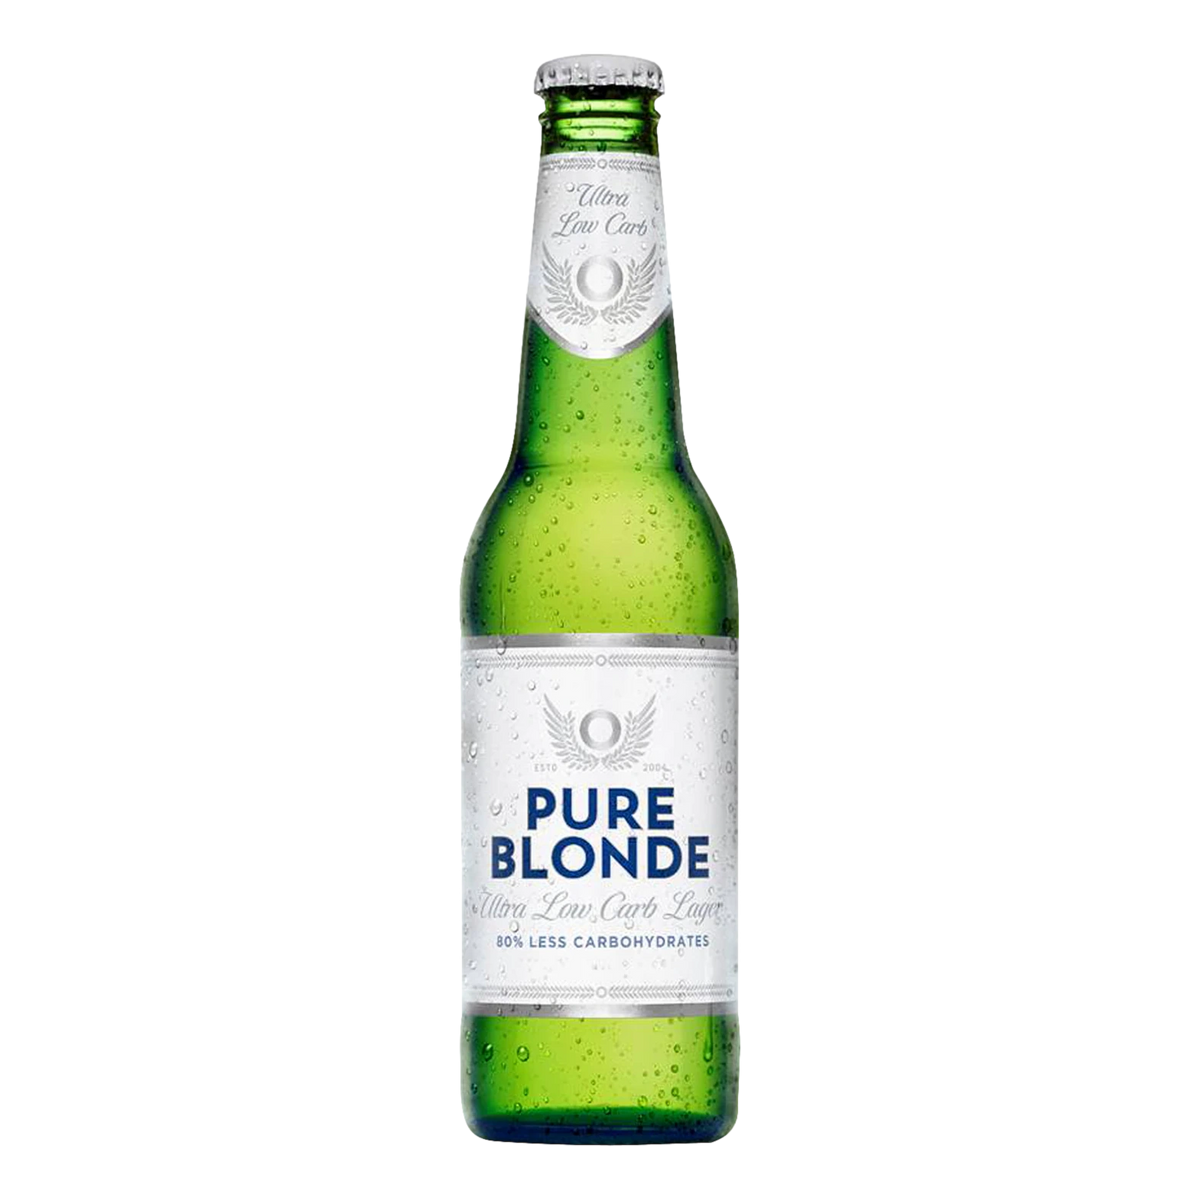 Pure Blonde Ultra Low Carb 80% Lager 355ml Bottle Case of 24